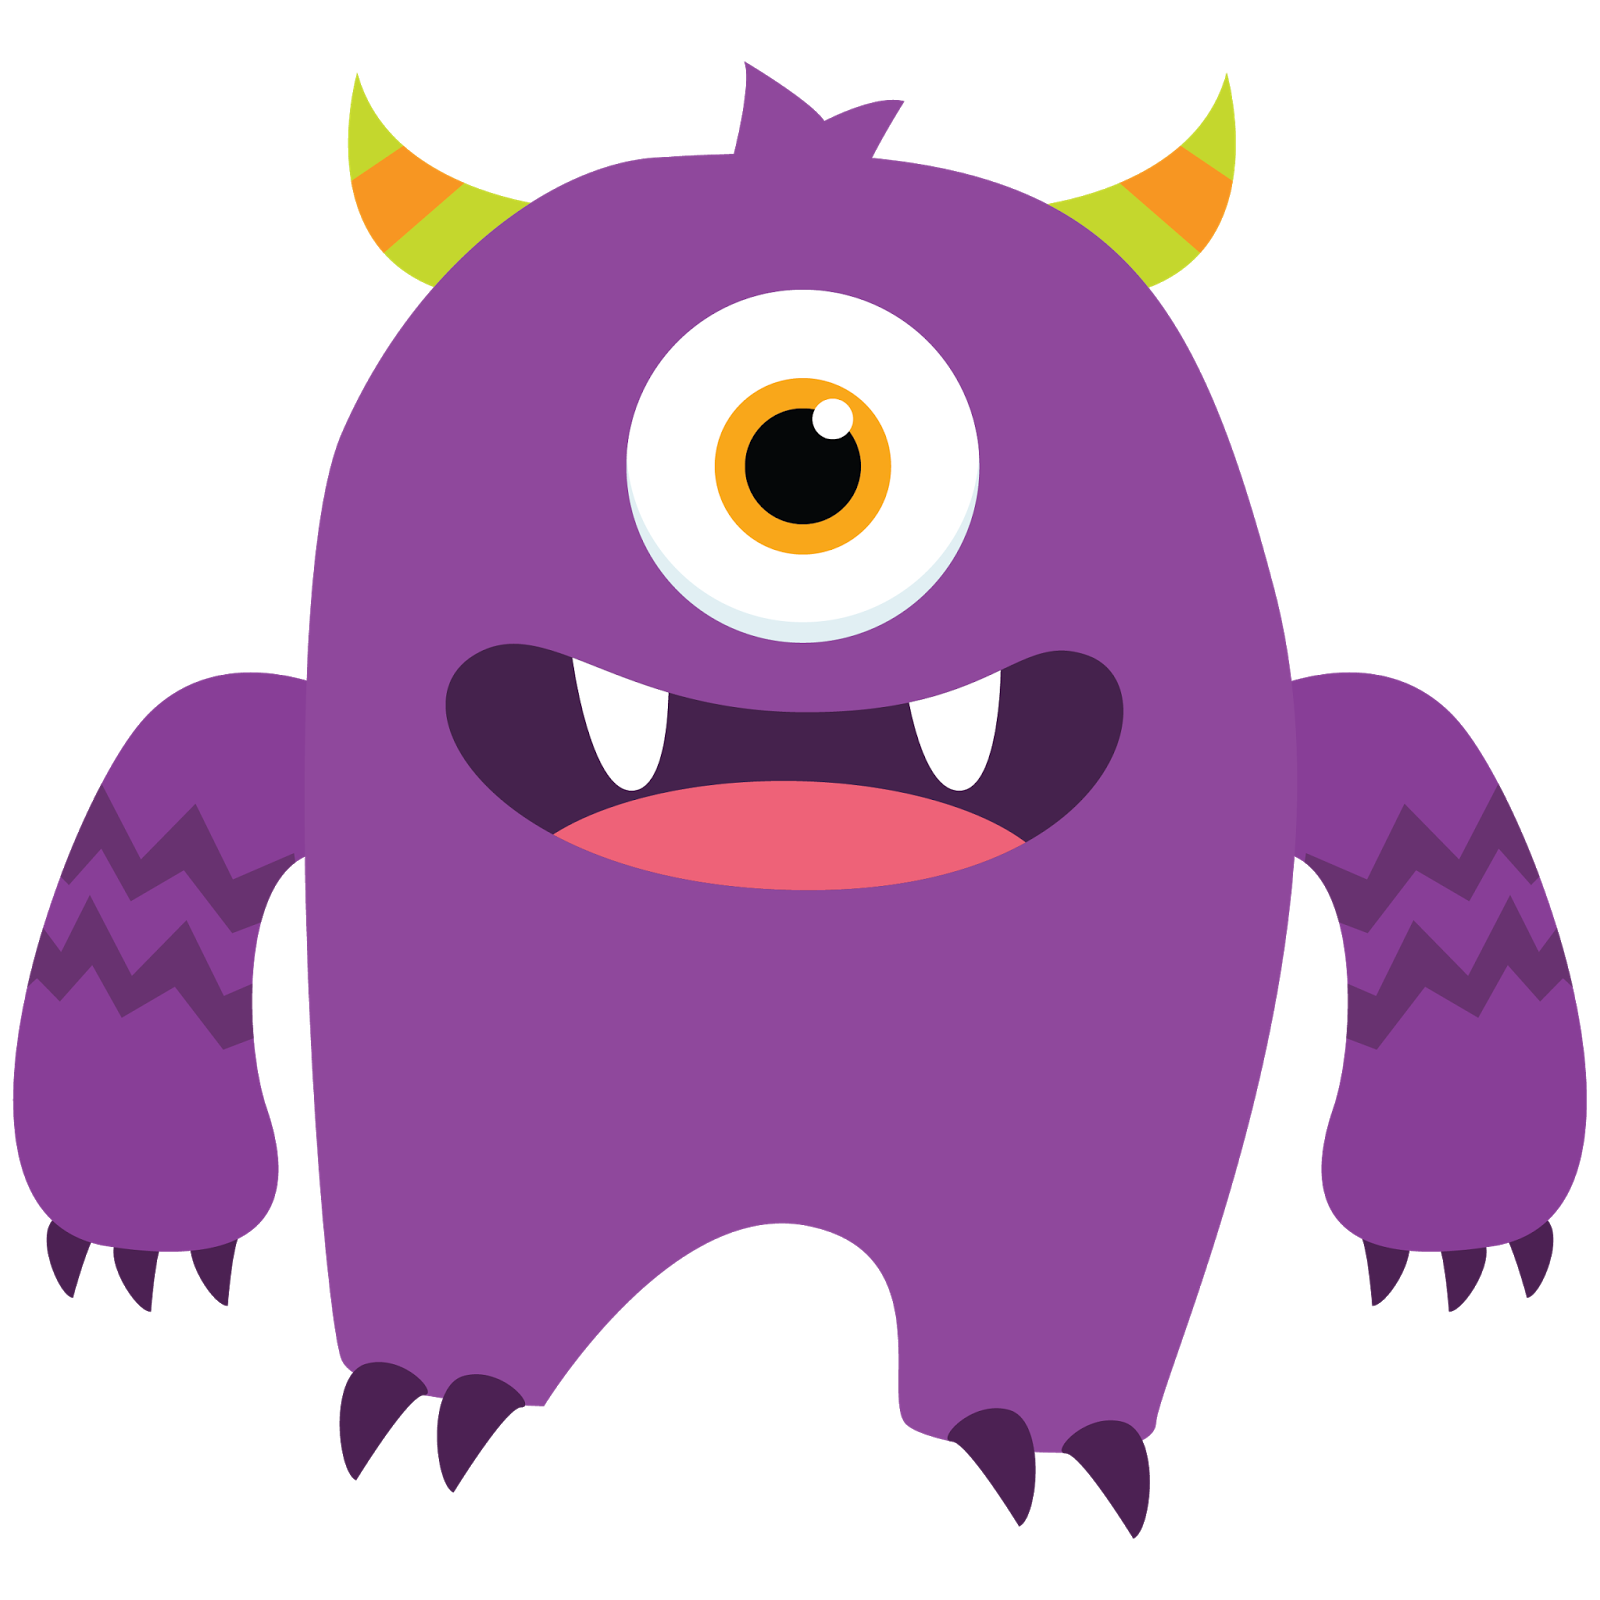 Valentine clipart monsters. Monster free images cute